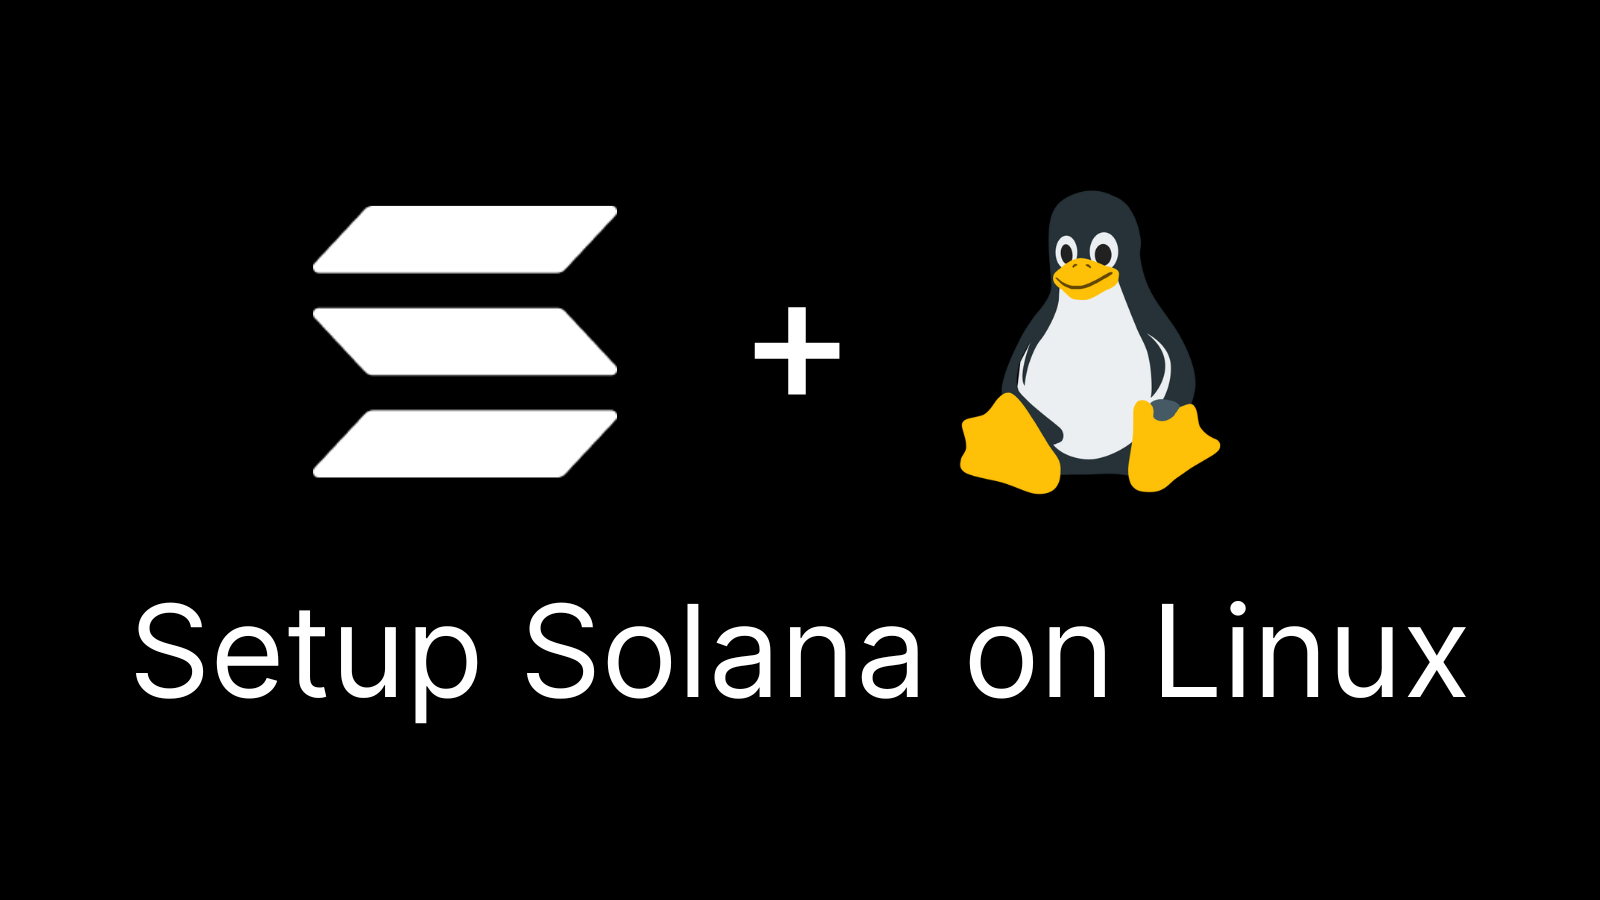 Get your Solana development environment setup on Linux with this complete installation guide